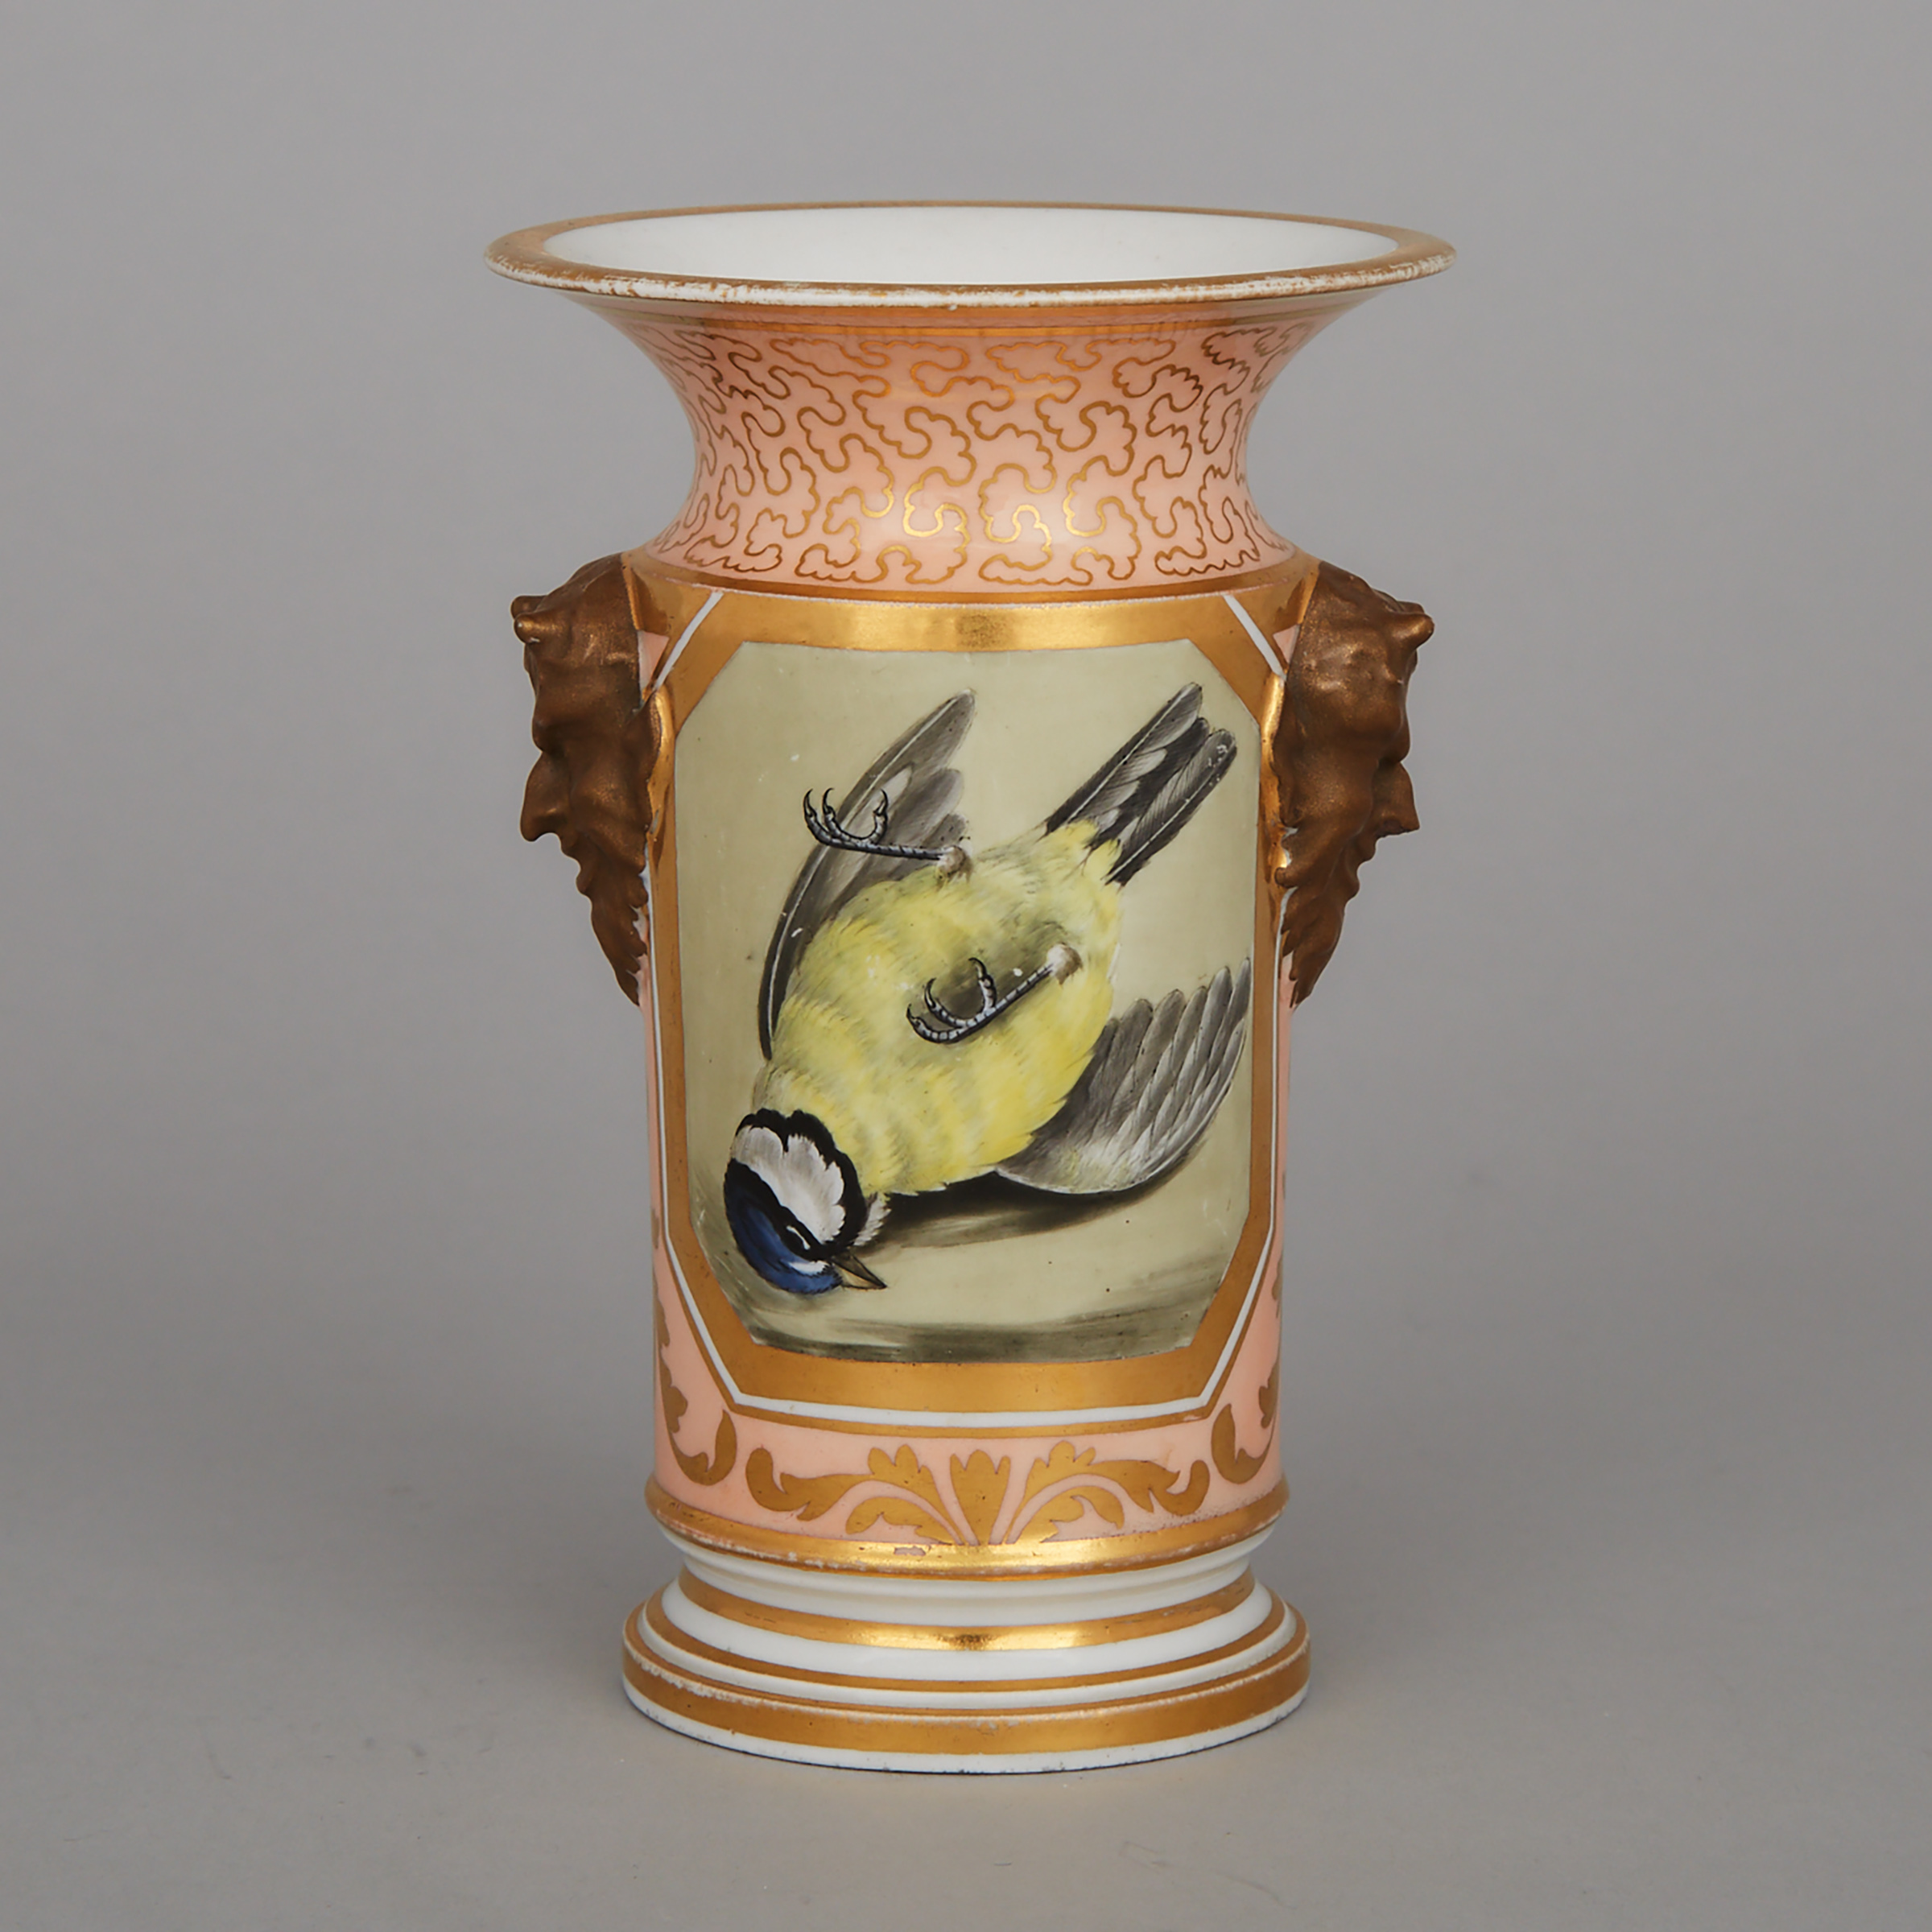 Flight & Barr Worcester Pink and Gilt Ground Ornithological Spill Vase, early 19th century